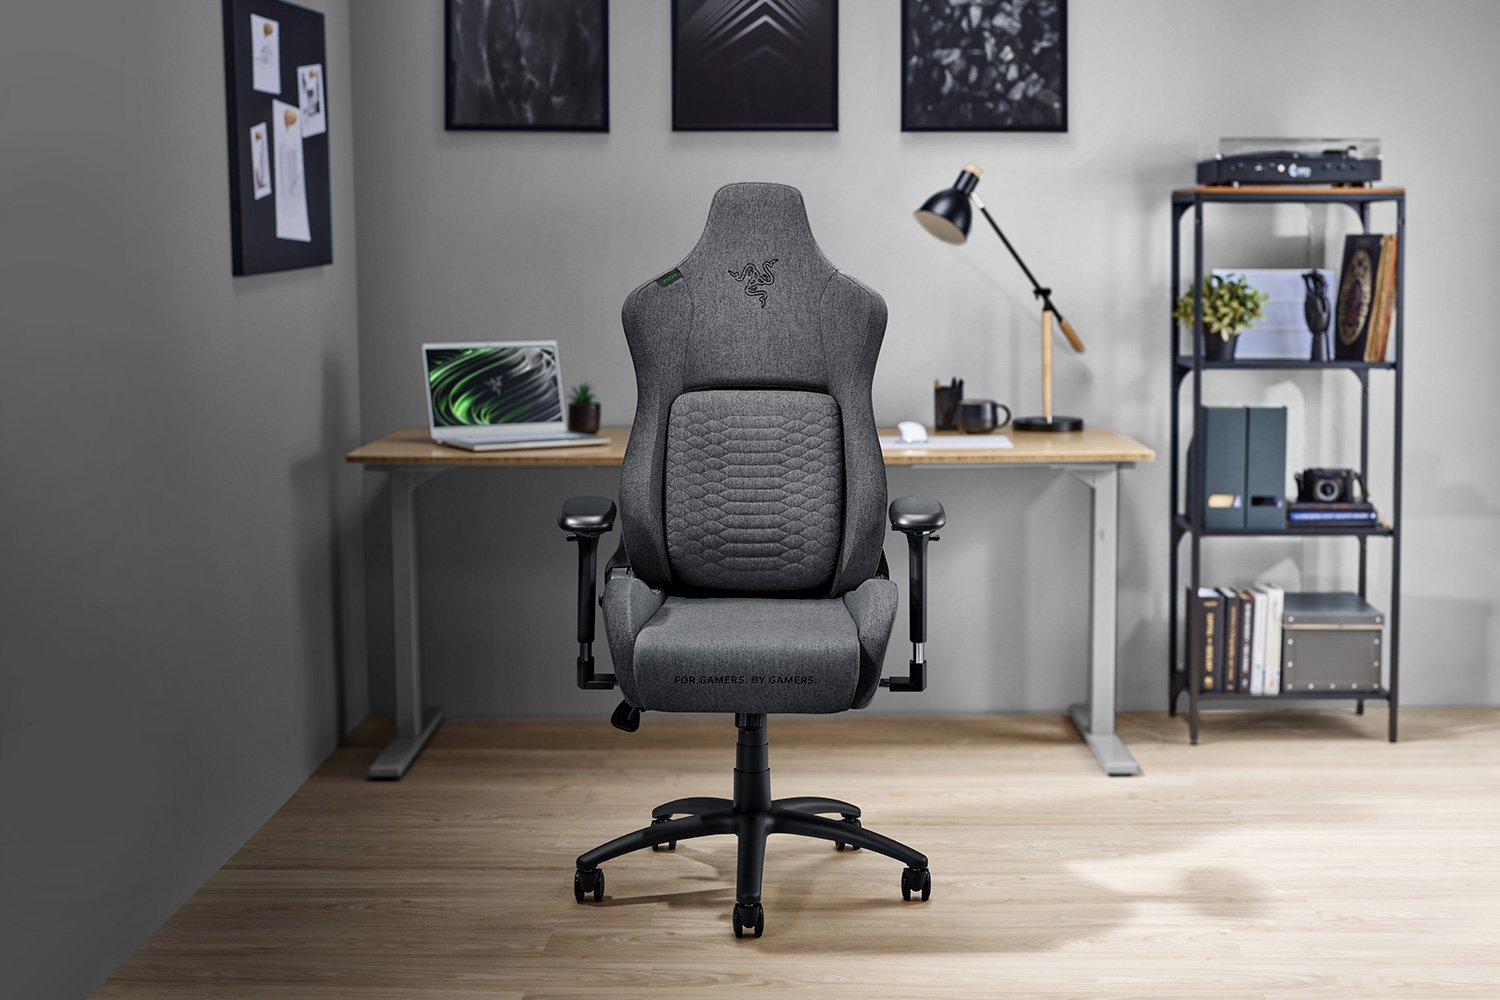 Razer Iskur Gaming Chair Now Comes In Sleek All-Black Design